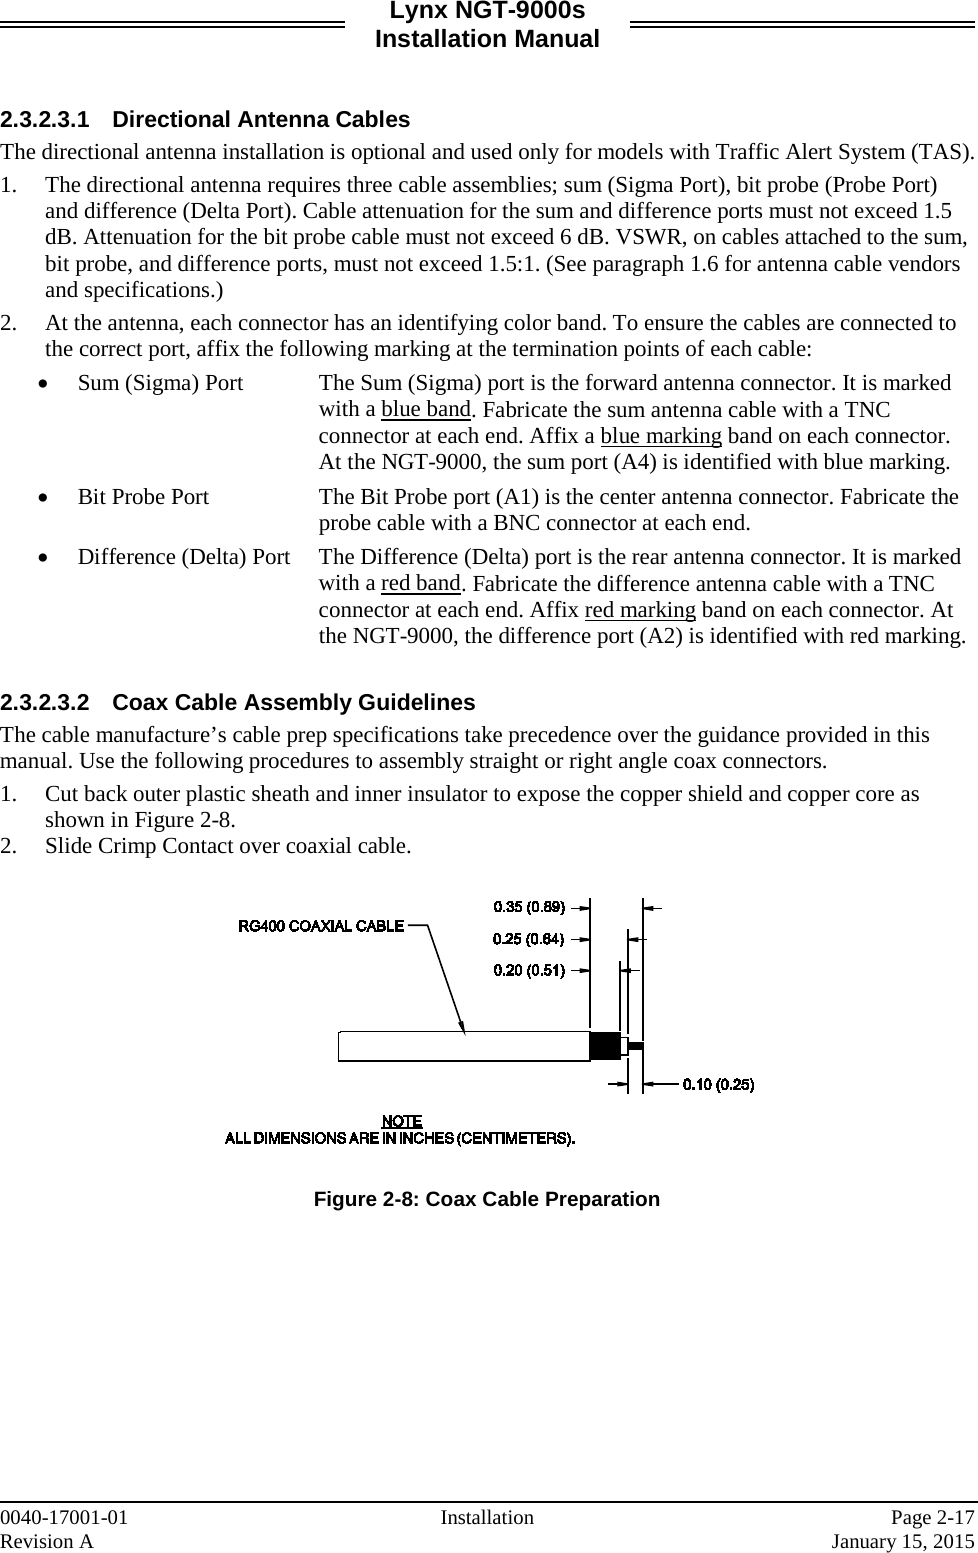 Lynx NGT-9000s Installation Manual   2.3.2.3.1 Directional Antenna Cables The directional antenna installation is optional and used only for models with Traffic Alert System (TAS).  1. The directional antenna requires three cable assemblies; sum (Sigma Port), bit probe (Probe Port) and difference (Delta Port). Cable attenuation for the sum and difference ports must not exceed 1.5 dB. Attenuation for the bit probe cable must not exceed 6 dB. VSWR, on cables attached to the sum, bit probe, and difference ports, must not exceed 1.5:1. (See paragraph 1.6 for antenna cable vendors and specifications.) 2. At the antenna, each connector has an identifying color band. To ensure the cables are connected to the correct port, affix the following marking at the termination points of each cable: • Sum (Sigma) Port  The Sum (Sigma) port is the forward antenna connector. It is marked with a blue band. Fabricate the sum antenna cable with a TNC connector at each end. Affix a blue marking band on each connector. At the NGT-9000, the sum port (A4) is identified with blue marking.  • Bit Probe Port  The Bit Probe port (A1) is the center antenna connector. Fabricate the probe cable with a BNC connector at each end.  • Difference (Delta) Port The Difference (Delta) port is the rear antenna connector. It is marked with a red band. Fabricate the difference antenna cable with a TNC connector at each end. Affix red marking band on each connector. At the NGT-9000, the difference port (A2) is identified with red marking.  2.3.2.3.2 Coax Cable Assembly Guidelines The cable manufacture’s cable prep specifications take precedence over the guidance provided in this manual. Use the following procedures to assembly straight or right angle coax connectors. 1. Cut back outer plastic sheath and inner insulator to expose the copper shield and copper core as shown in Figure 2-8.   2. Slide Crimp Contact over coaxial cable.   Figure 2-8: Coax Cable Preparation    0040-17001-01 Installation   Page 2-17 Revision A     January 15, 2015 